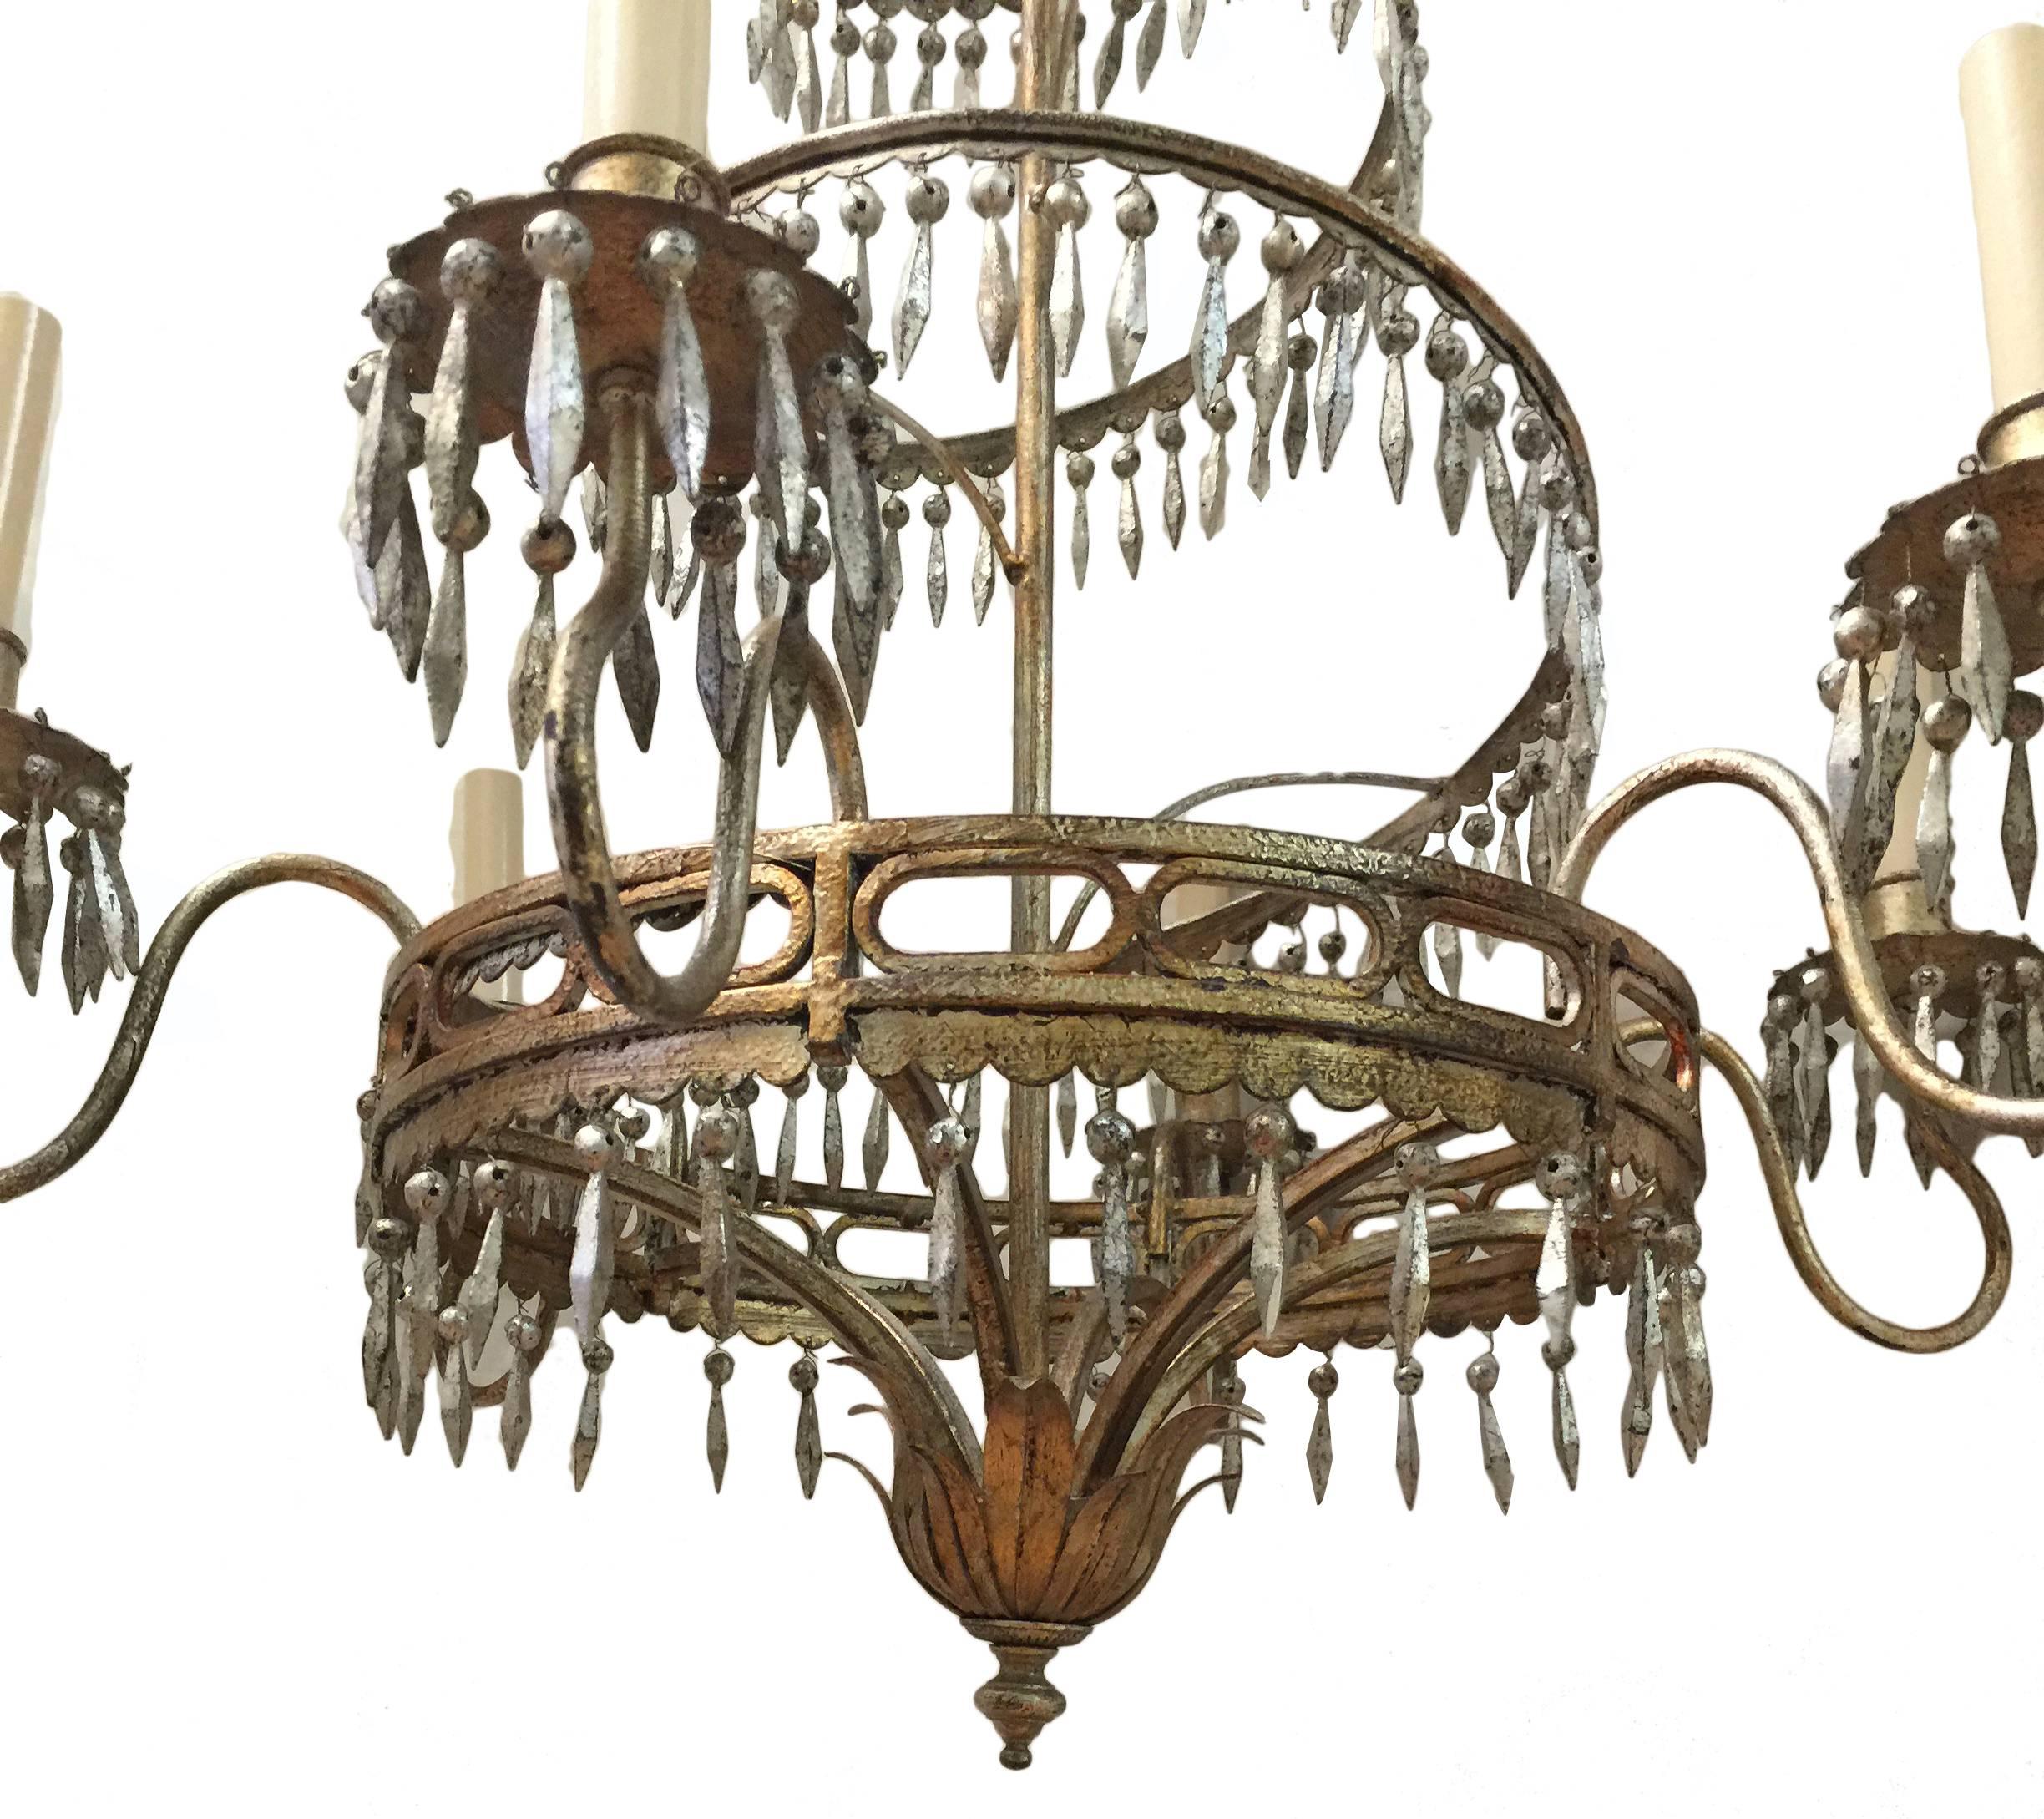 An Italian circa 1950s silver plated chandelier with 6 lights, patinated finish. The body with metal pendants.

Measurements:
Drop: 40